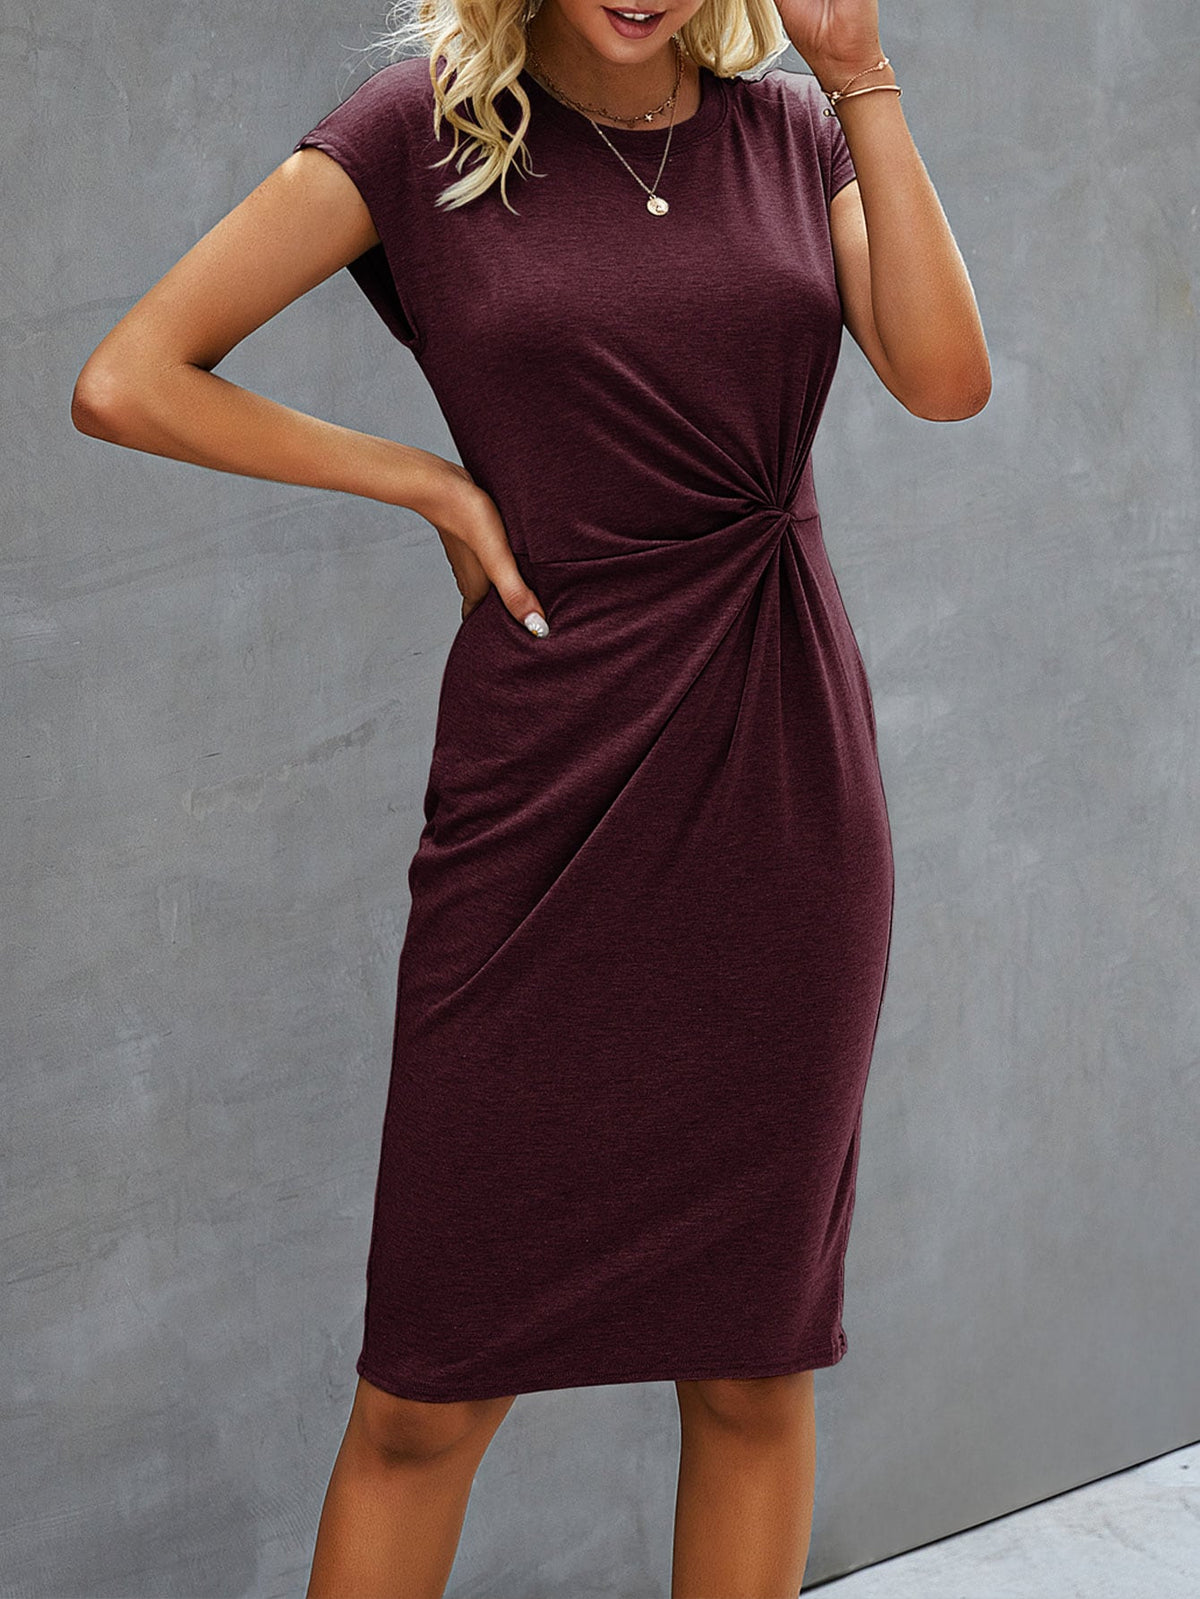 Casual Twist Solid Fitted Dress - High Waist, Knee Length, Batwing Sleeves